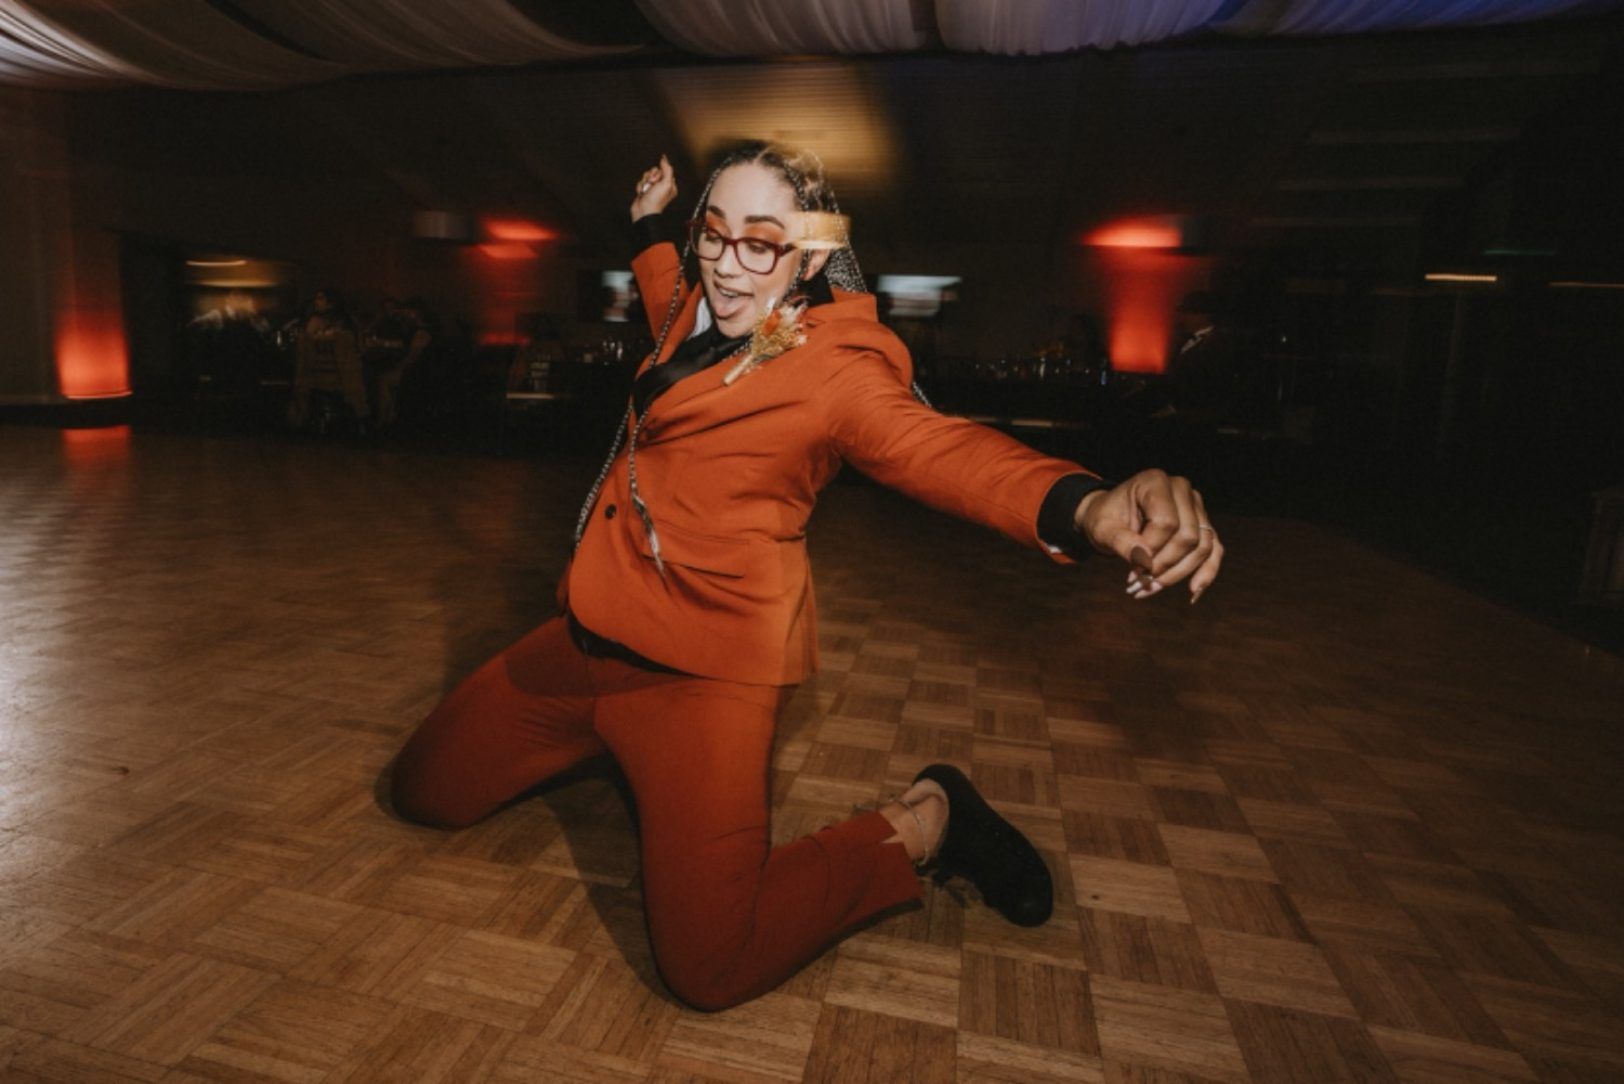  Bold girl's suit prom style in burnt orange pants outfit for prom sliding on dance floor.